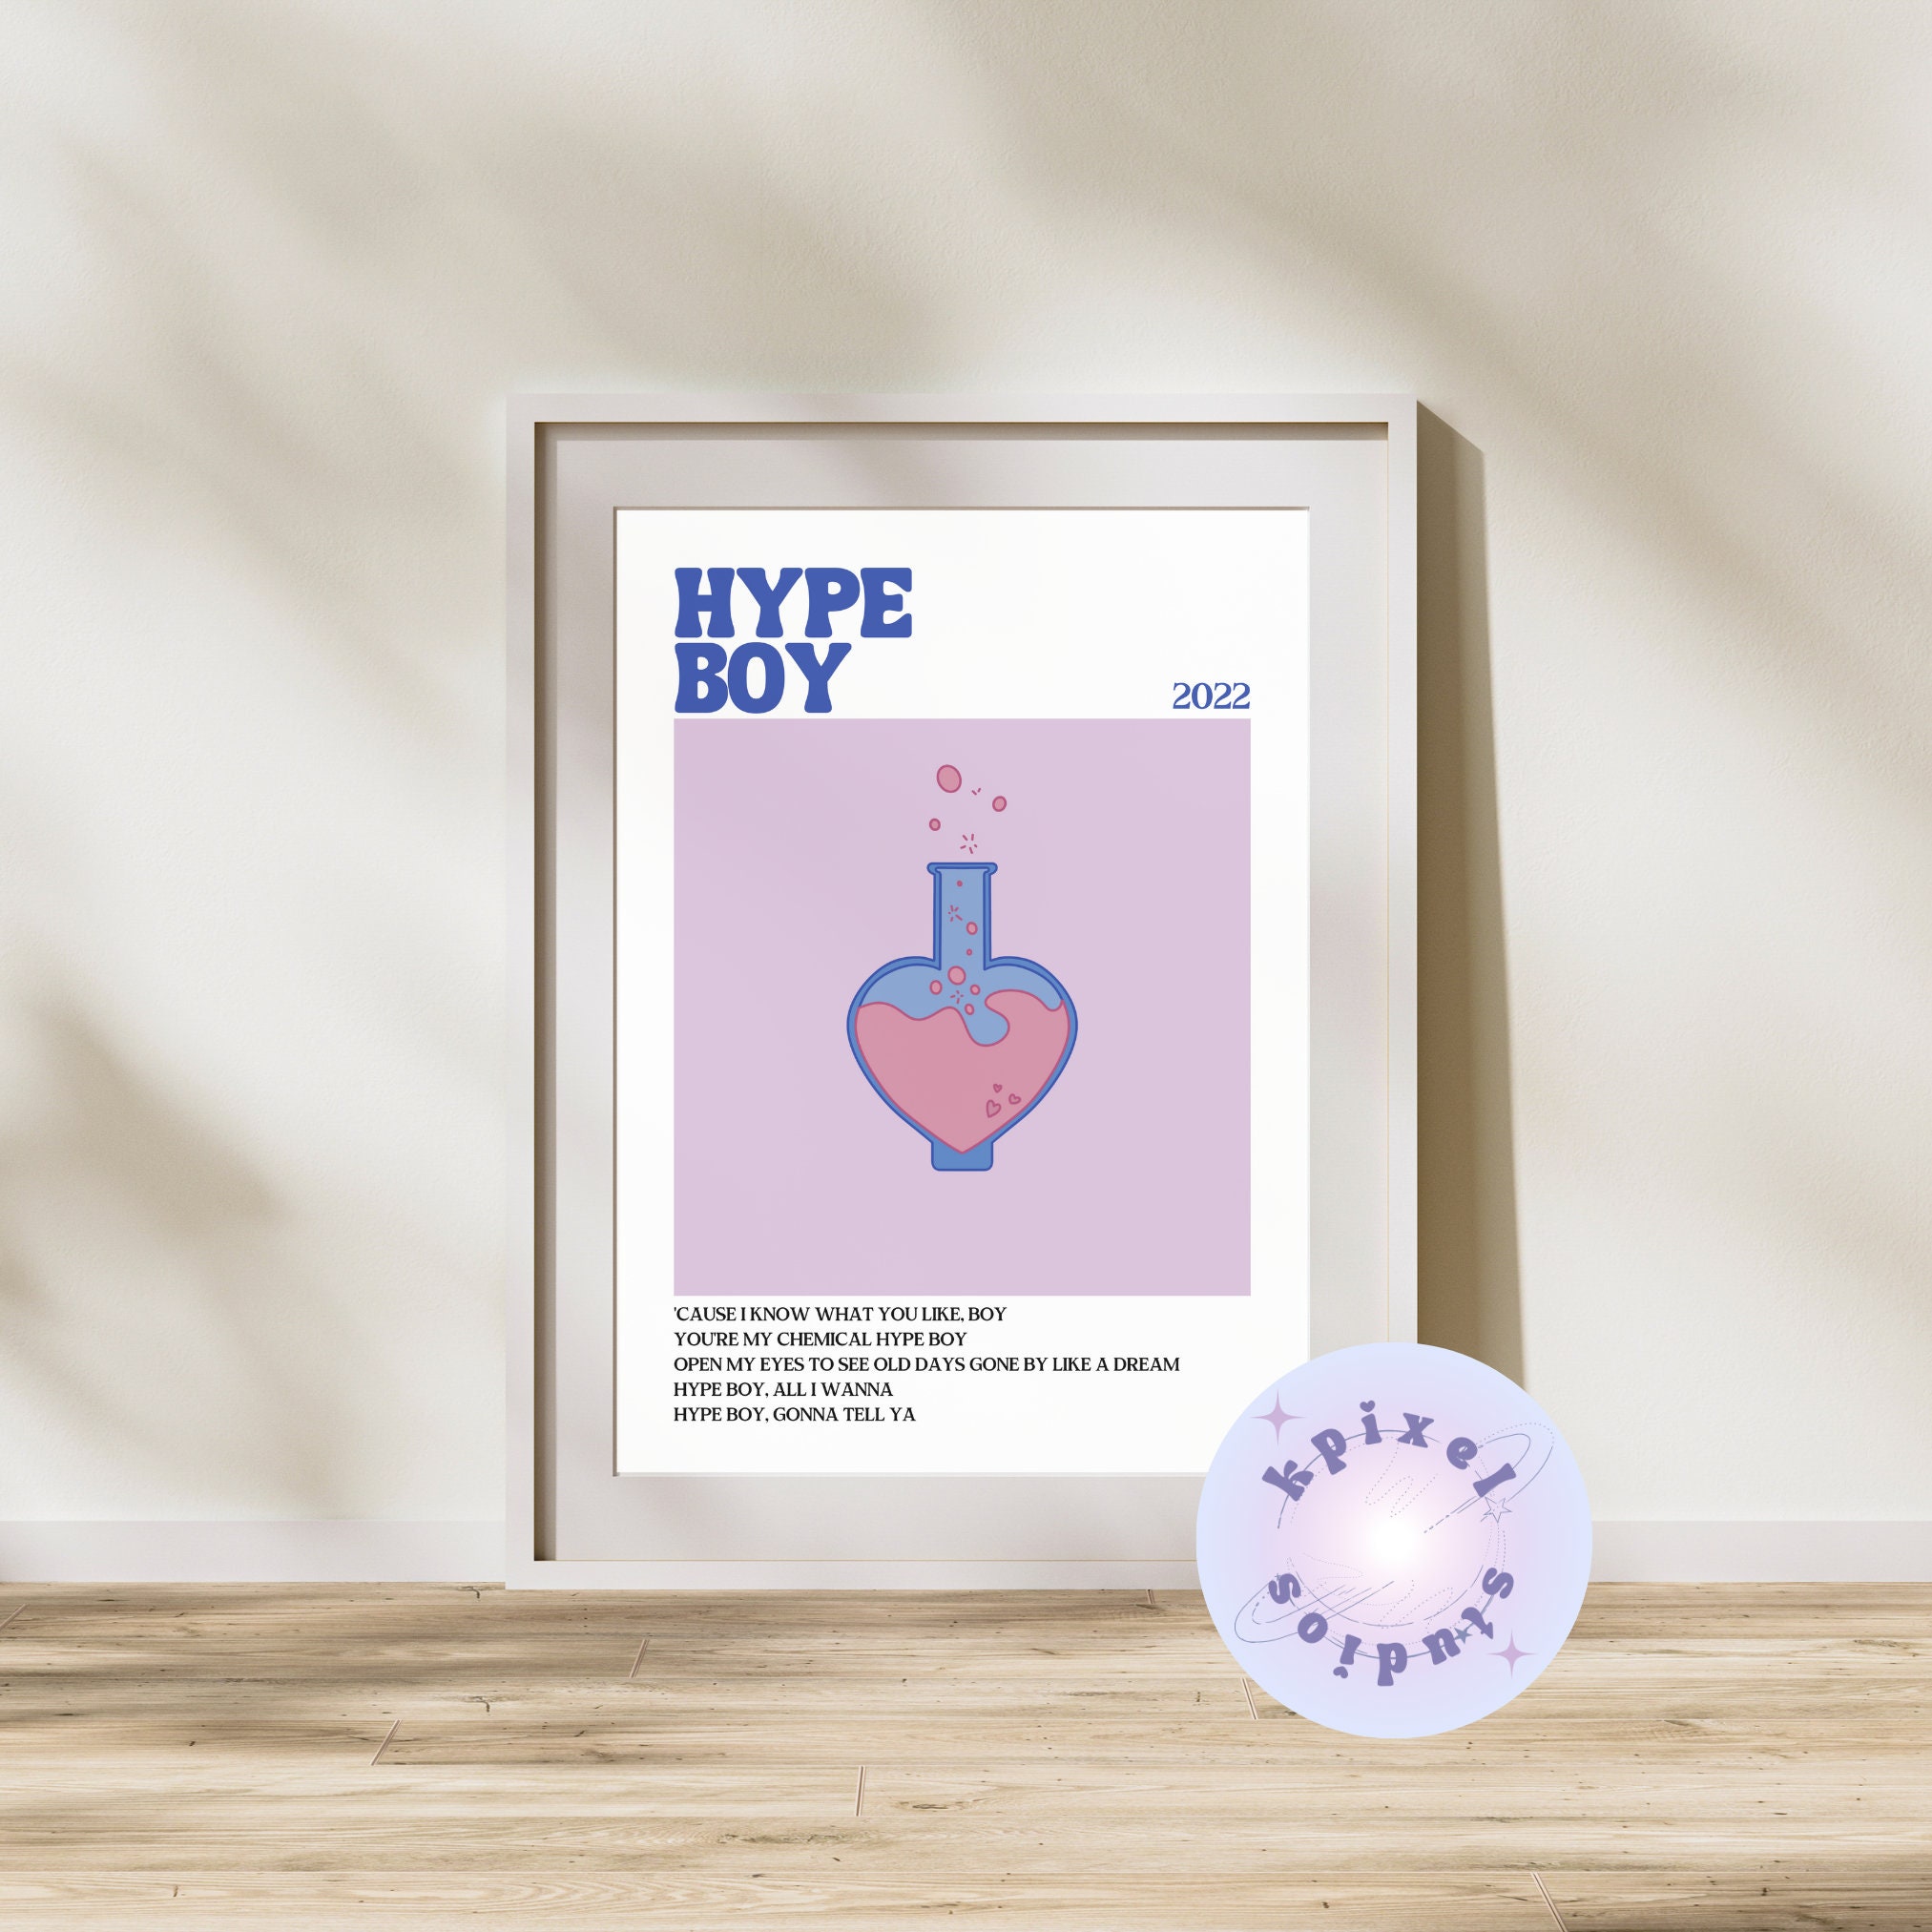 Hype Boy Music Album Poster NewJeans South Korean Girls Group Dormitory  Bedroom Wall Art Deco Poster Canvas Poster Bedroom Decor Sports Landscape  Office Room Decor Gift Frame Style : : Home 